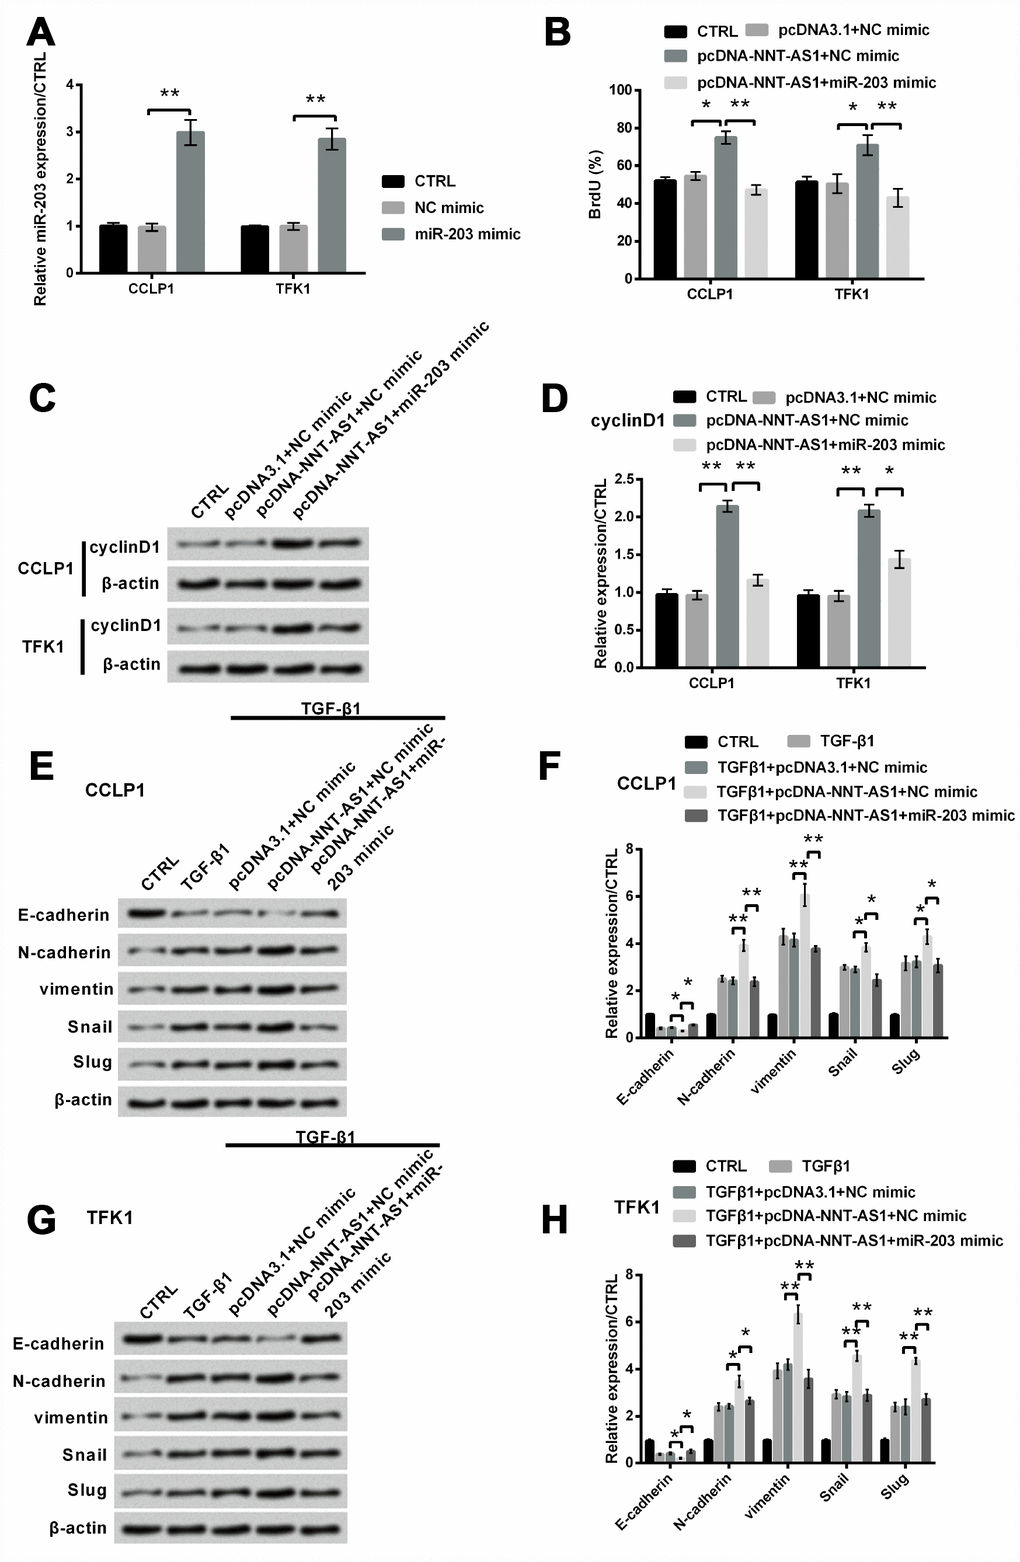 Mechanism of NNT-AS1 on proliferation and EMT in CCLP1 and TFK1 cells after co-transfection with pcDNA-NNT-AS1 and miR-203 mimic. (A) Standard of miR-203 was examined via qRT-PCR by transfection with miR-203 mimic. (B) Proliferation was examined via BrdU. Expression of cyclinD1 was examined via western blot (C) and analyzed quantitatively (D) in both cells. Expression of EMT related factors was inspected via western blot (E, G) and analyzed quantitatively (F, H) in CCLP1 and TFK1 cells. * P P 